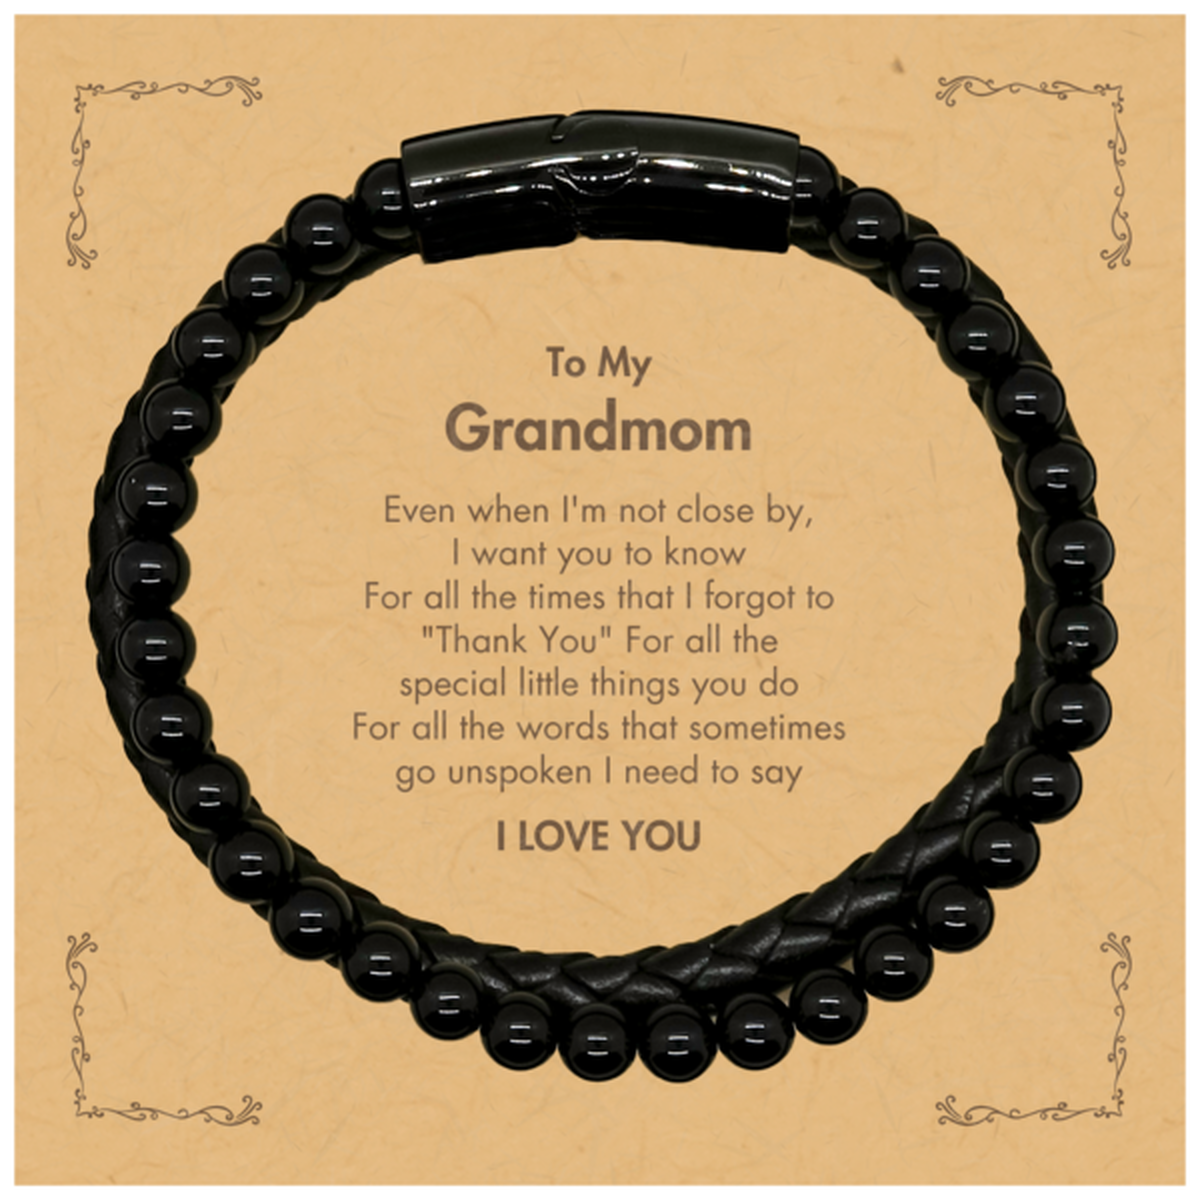 Thank You Gifts for Grandmom, Keepsake Stone Leather Bracelets Gifts for Grandmom Birthday Mother's day Father's Day Grandmom For all the words That sometimes go unspoken I need to say I LOVE YOU